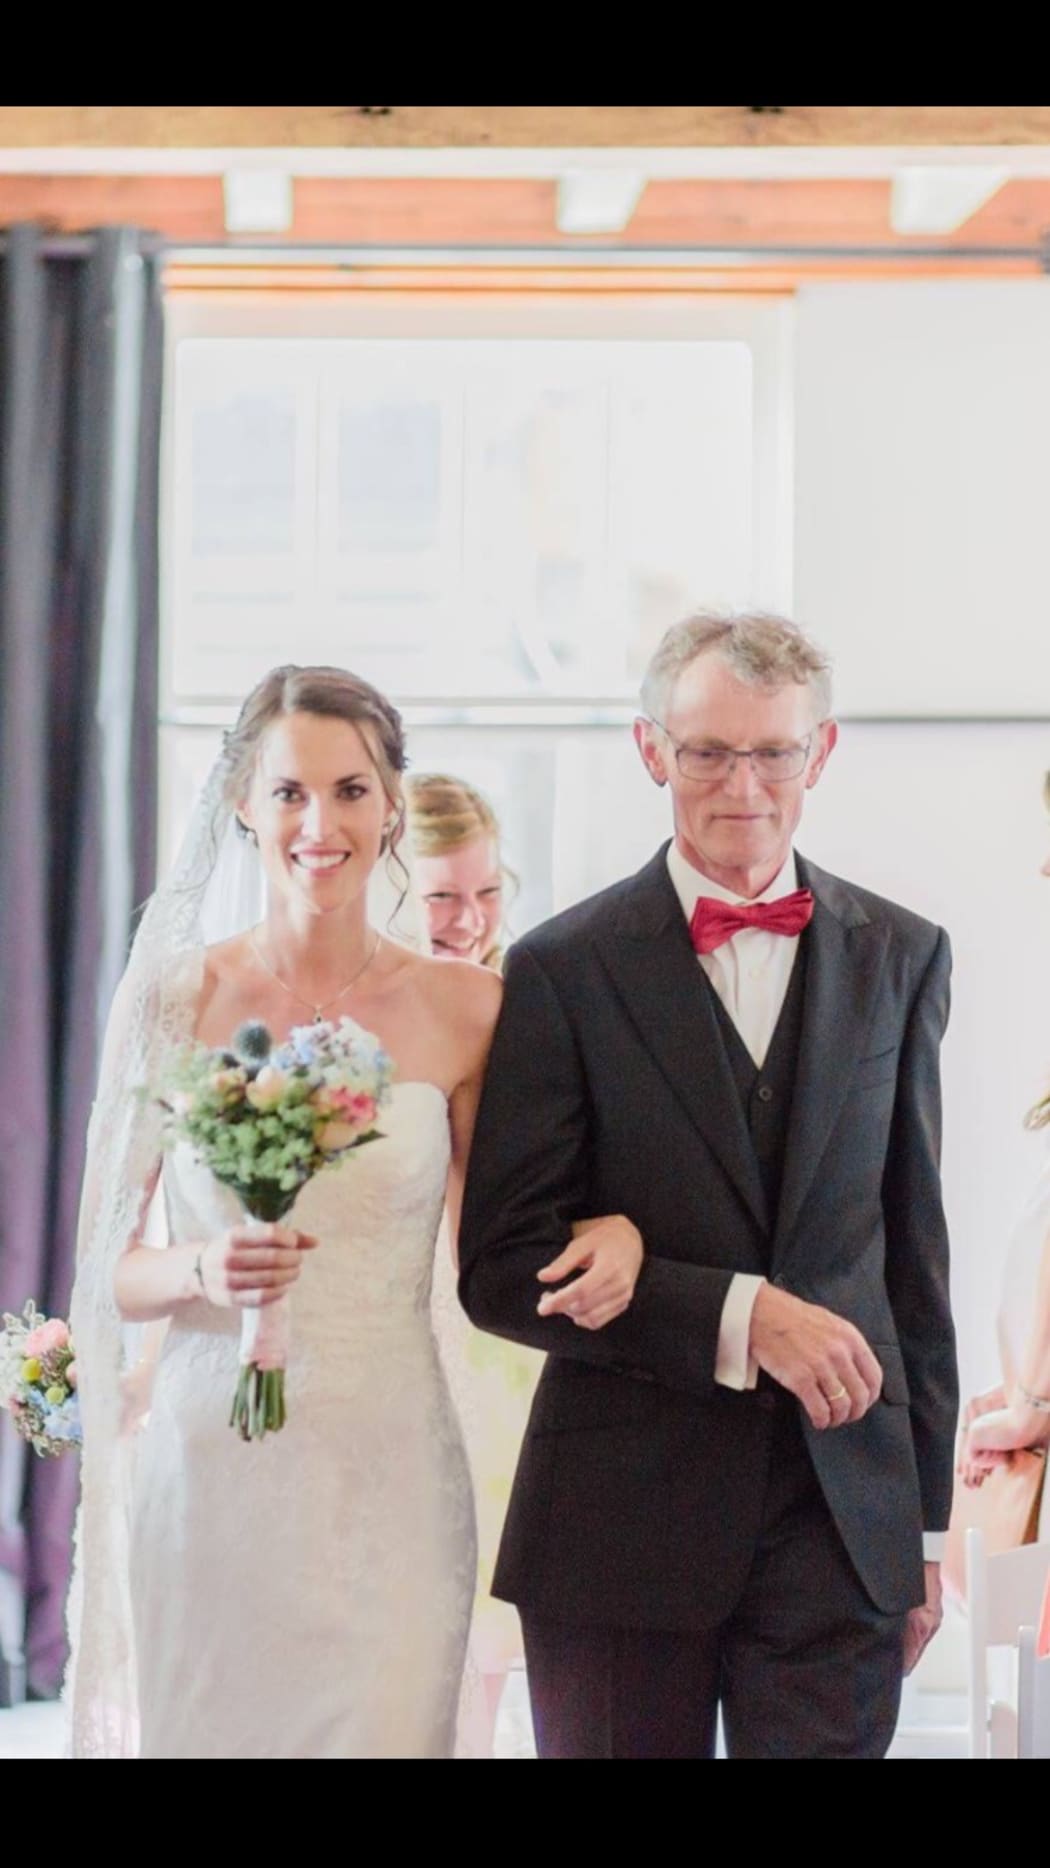 Melissa Hogenboom and her father Piet walking down the aisle on her wedding day